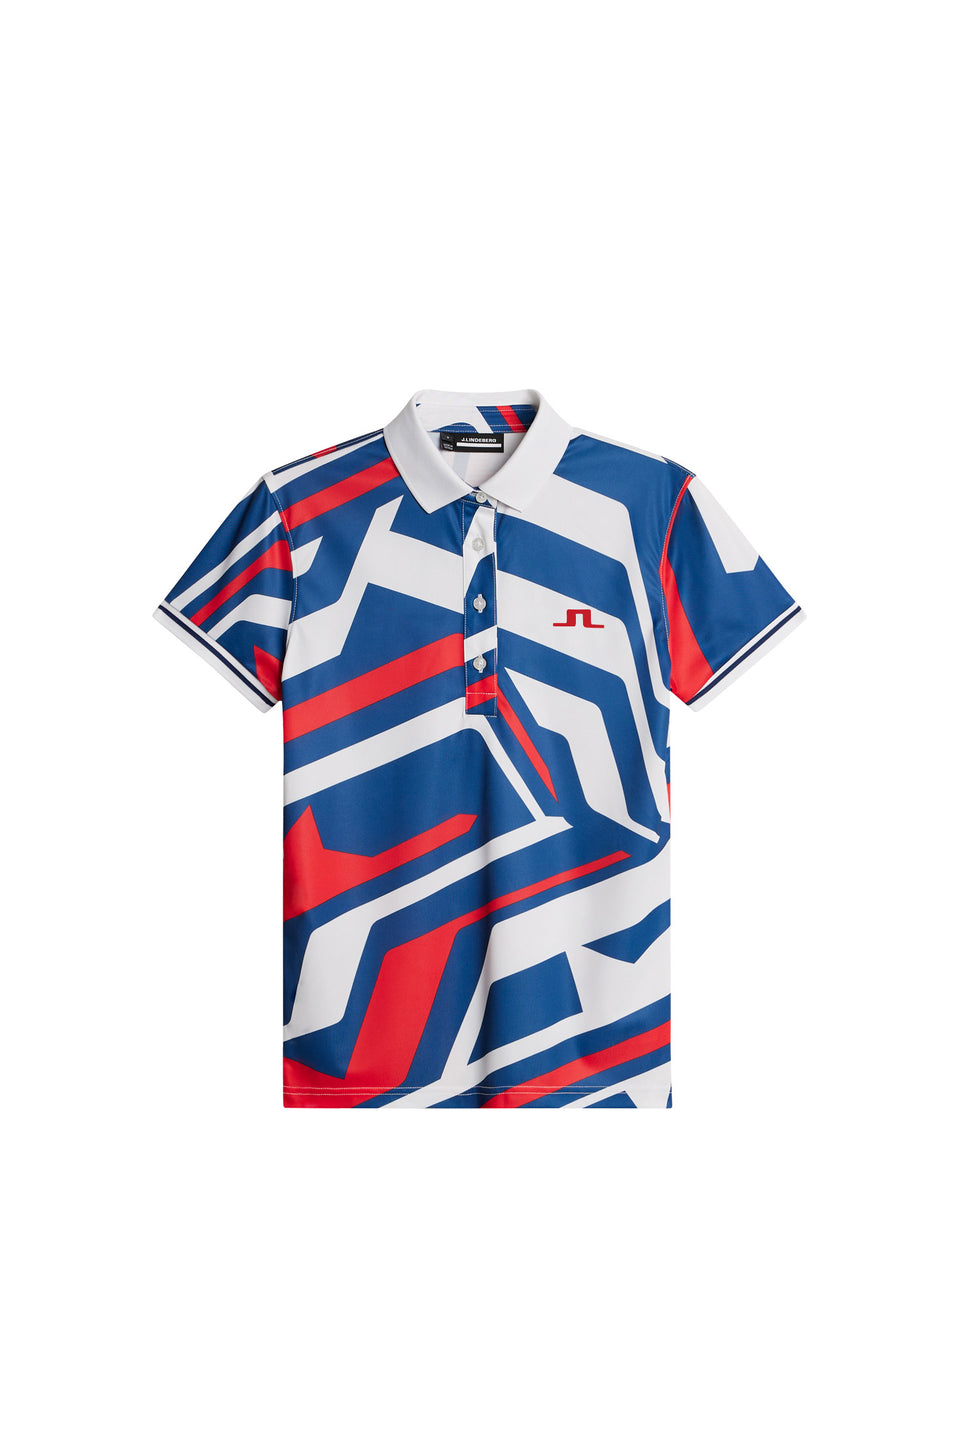 Felicite Print Polo / US Golf Red